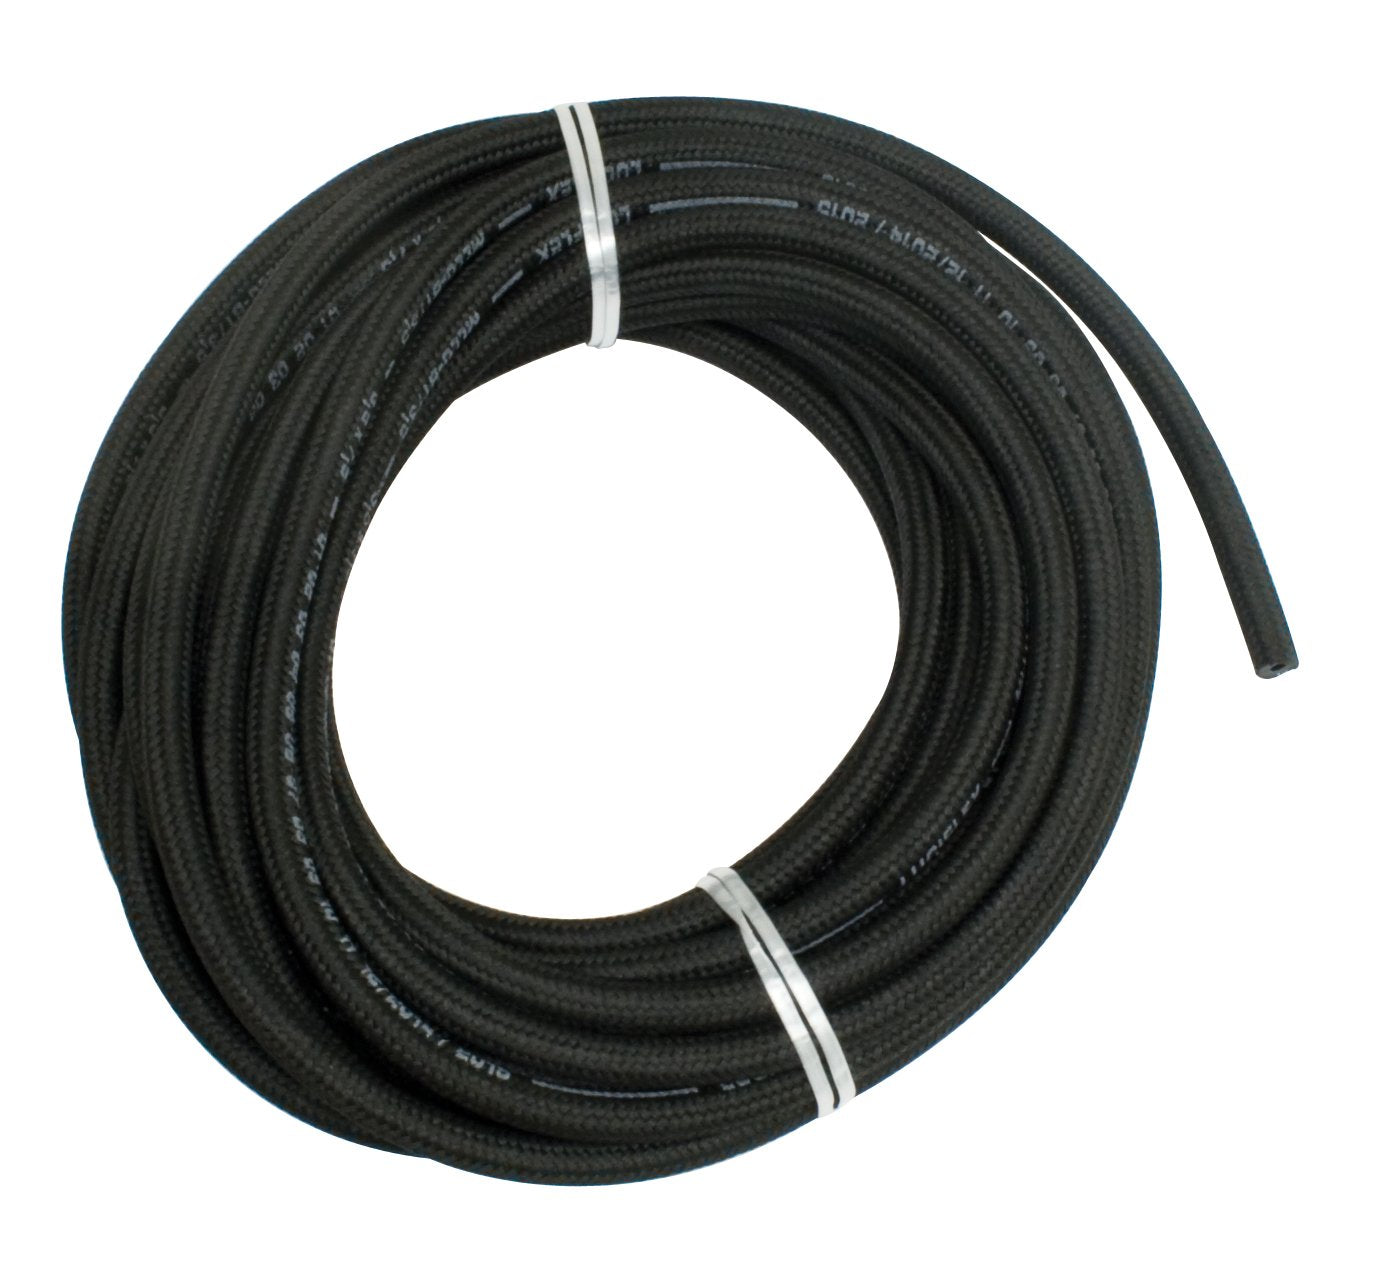 VW Bug OE Style Braided Fabric Fuel Hose, 3.5mm I.D. x 10 Meter Roll